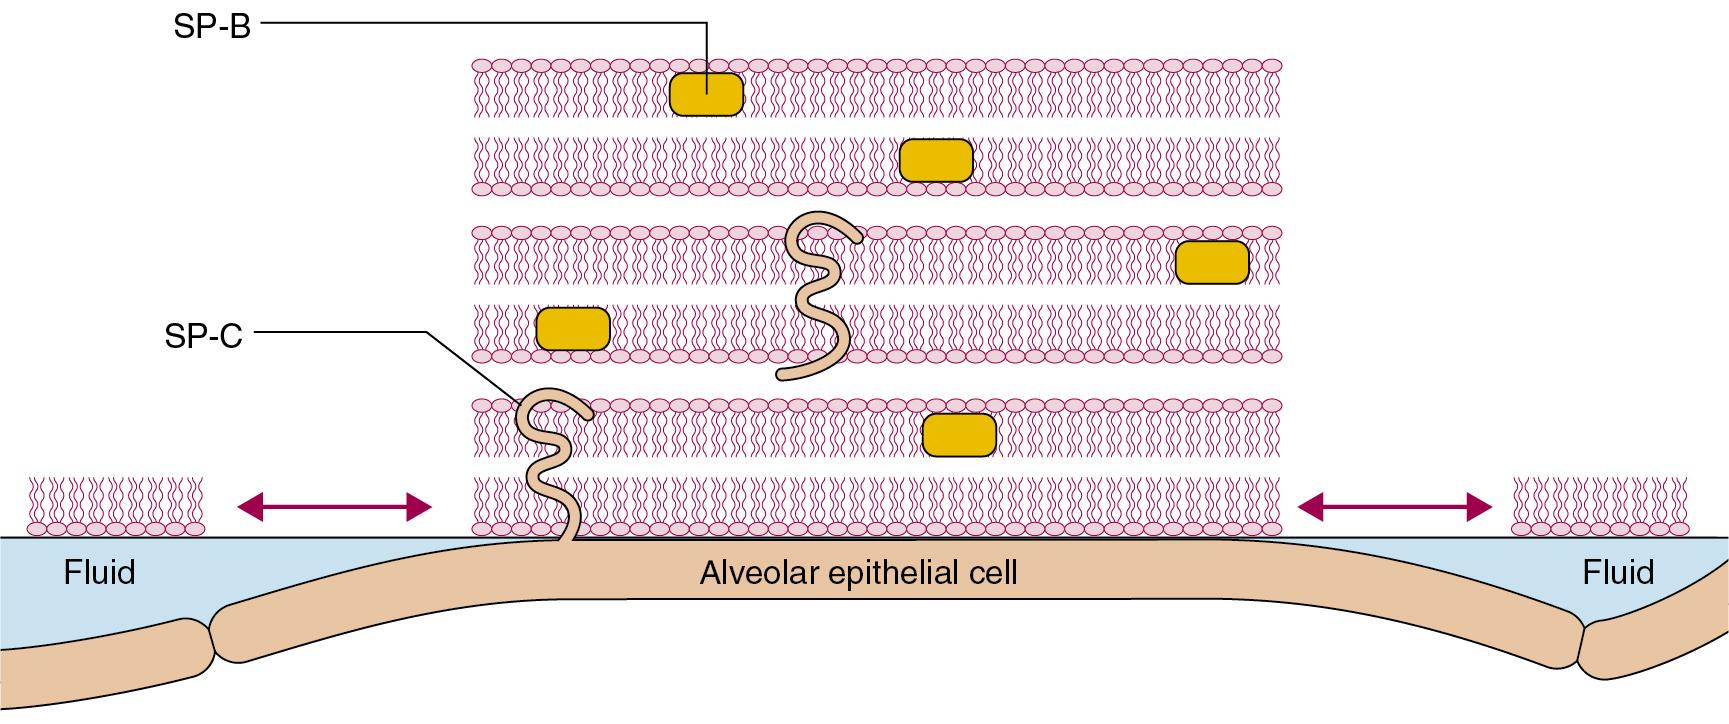 • Fig. 2.2, Morphological model of alveolar surfactant. Multilayered, less wettable rafts of surfactant are interspersed with fluid pools. Surfactant proteins lie within (SP-B) or across (SP-C) the lipid bilayers, facilitating the formation and dispersion of the rafts with each breath to modify the surface forces within the alveolus.